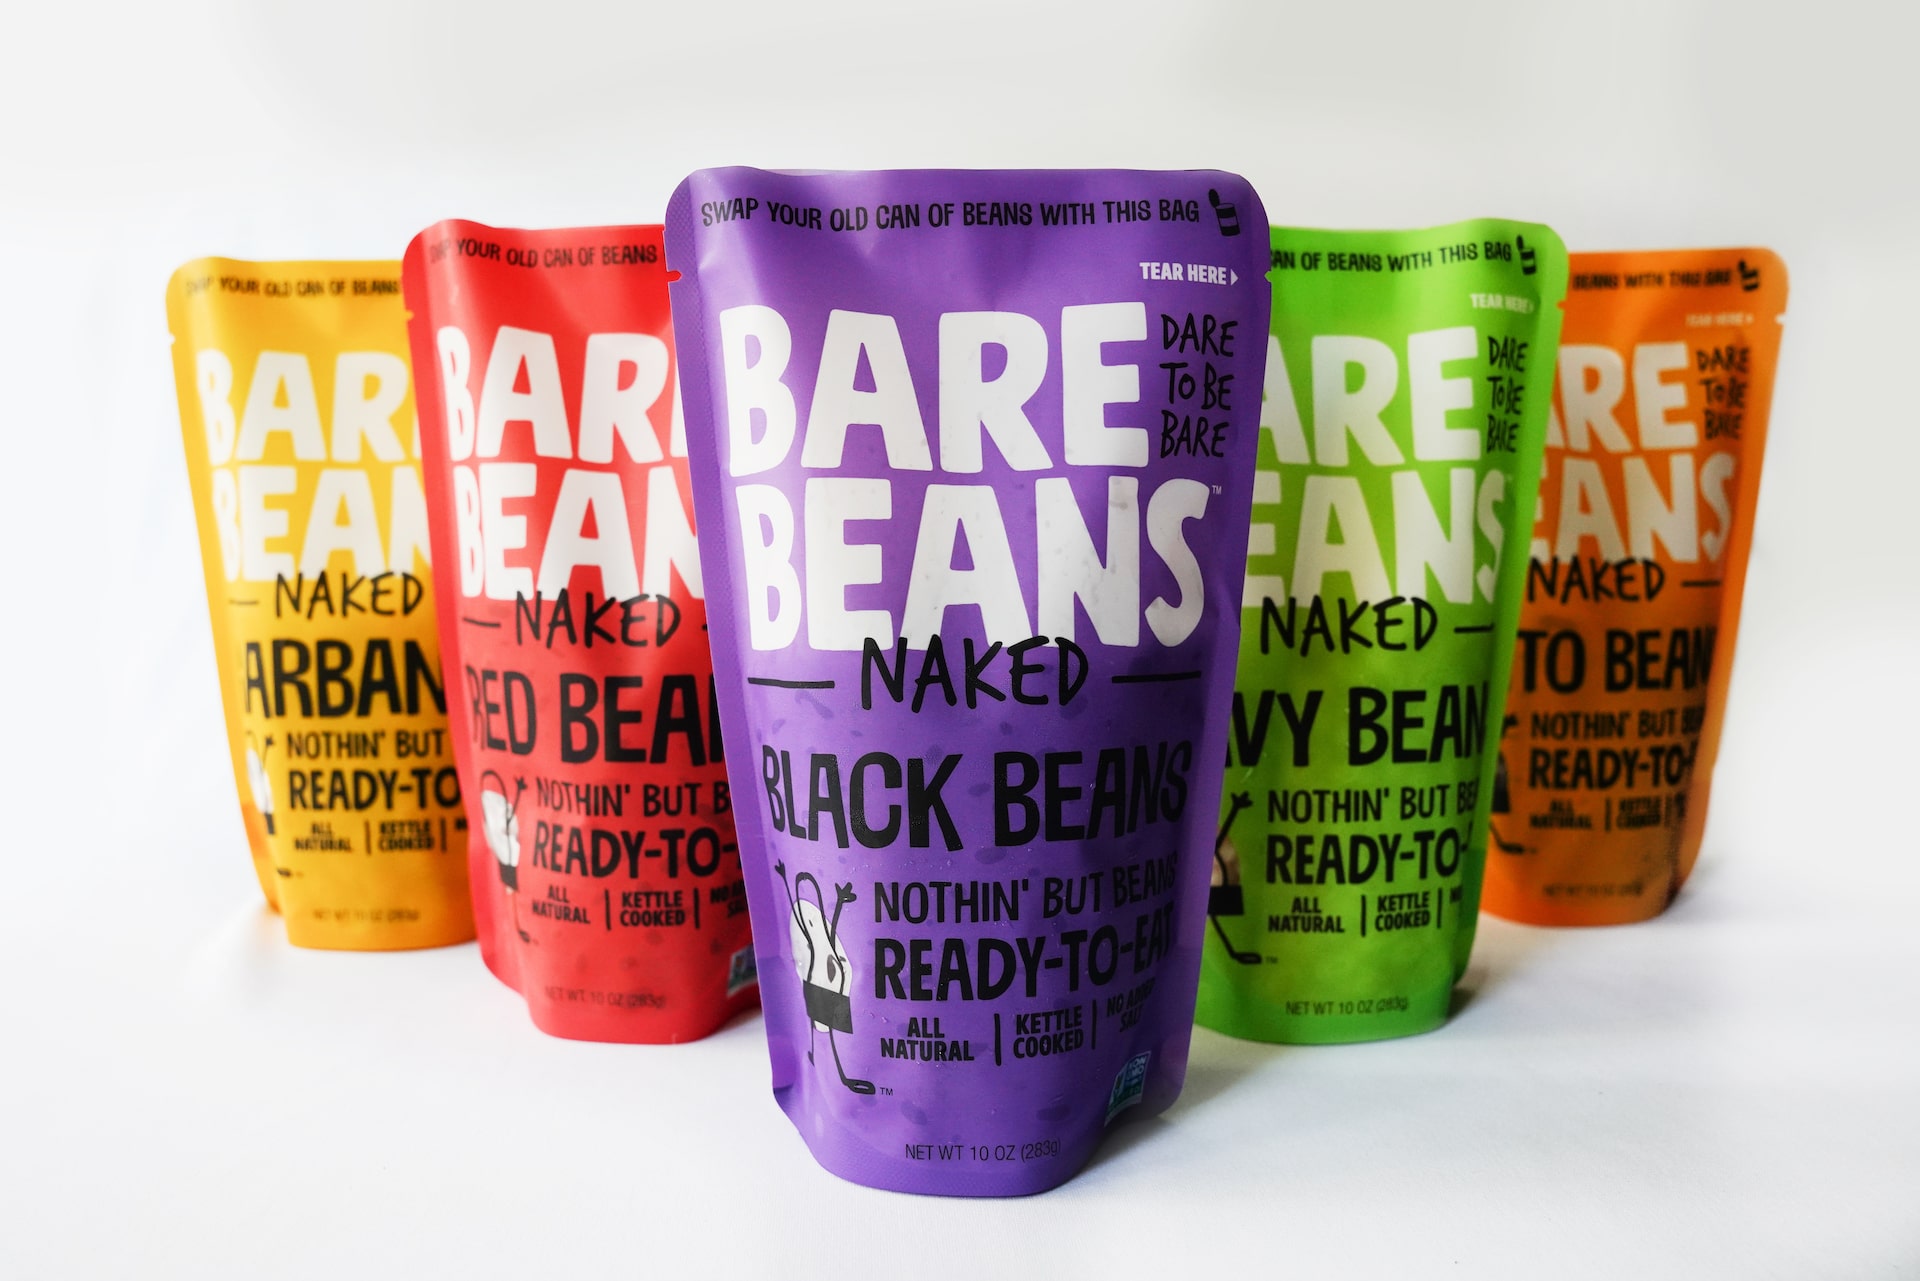 Bare Beans Product Line